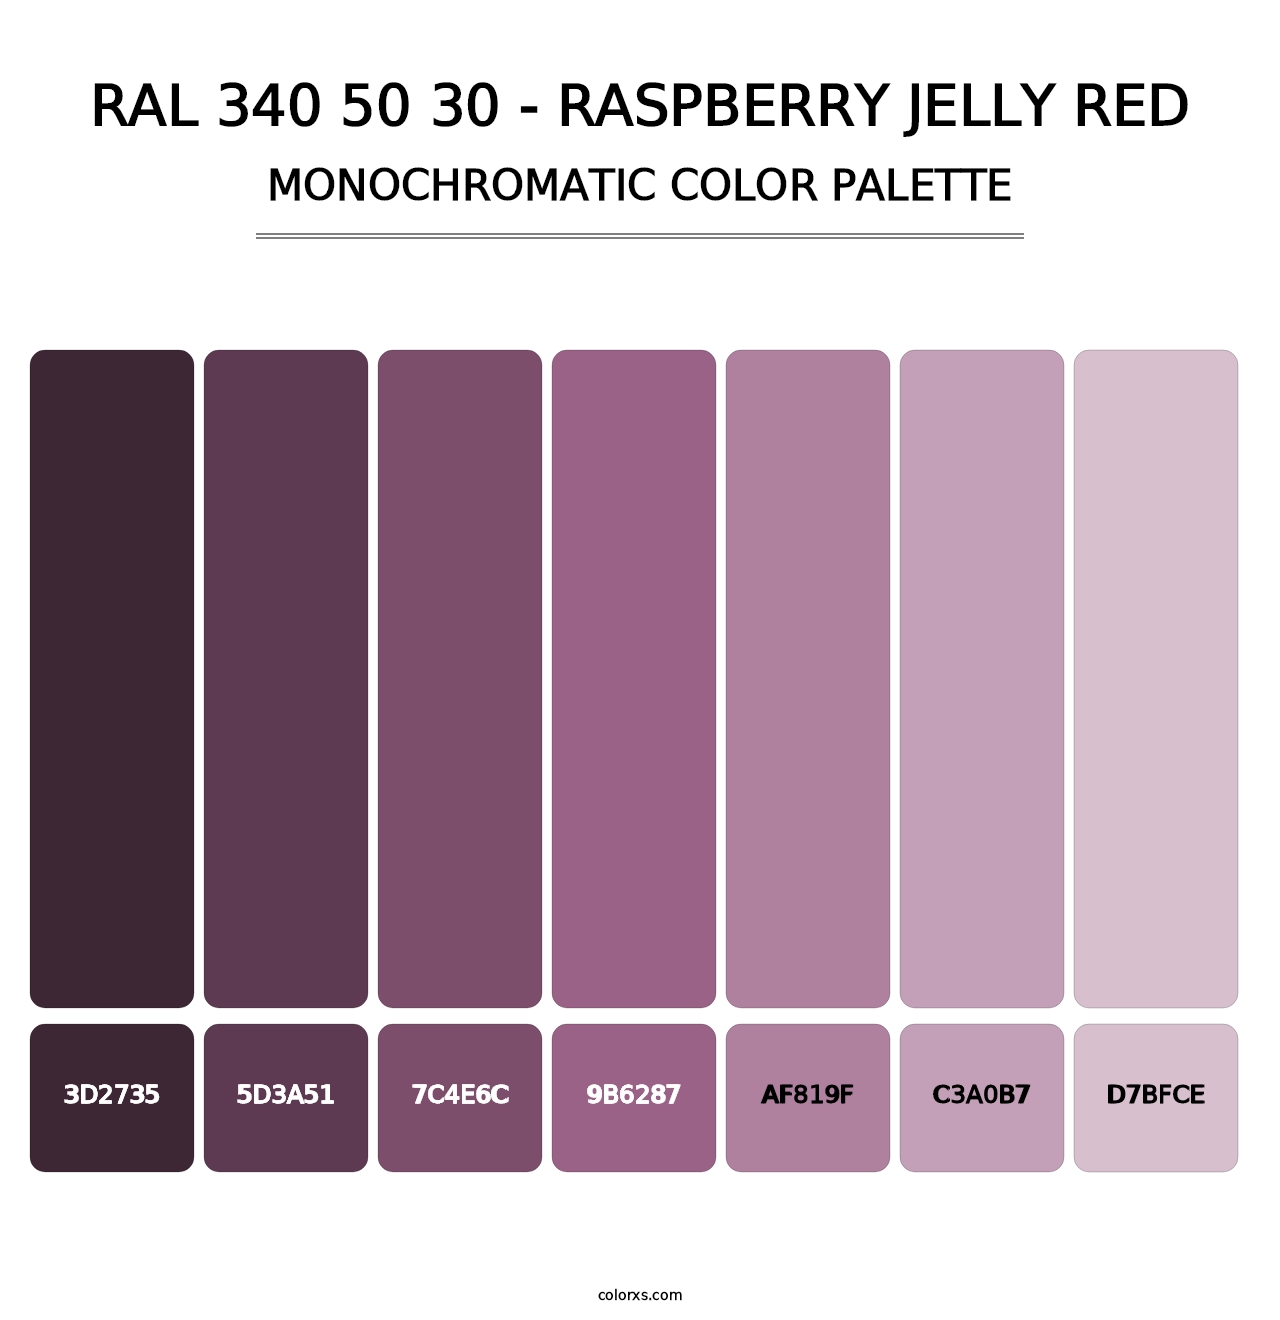 RAL 340 50 30 - Raspberry Jelly Red - Monochromatic Color Palette